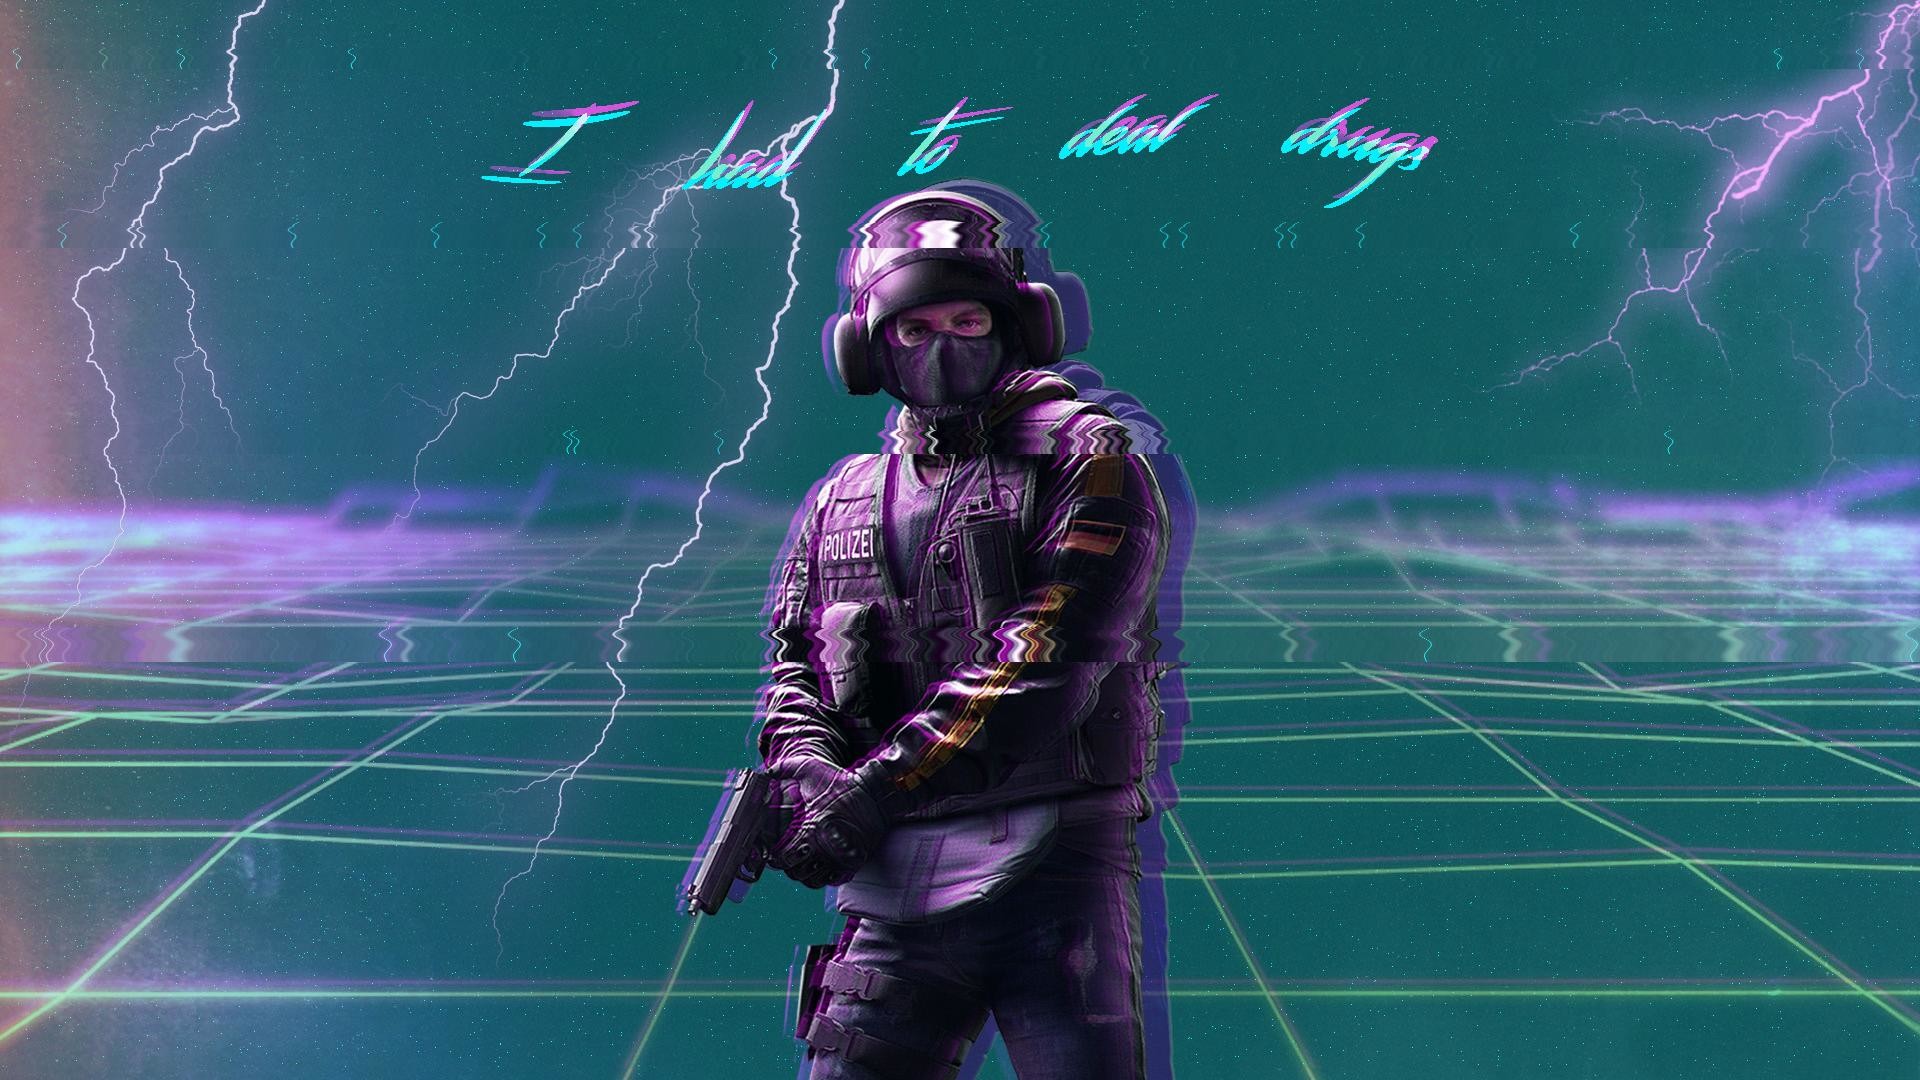 1920x1080 CreativeAfter seeing a few Siege Vaporwave wallpapers, I decided to give it  a try with Bandit!